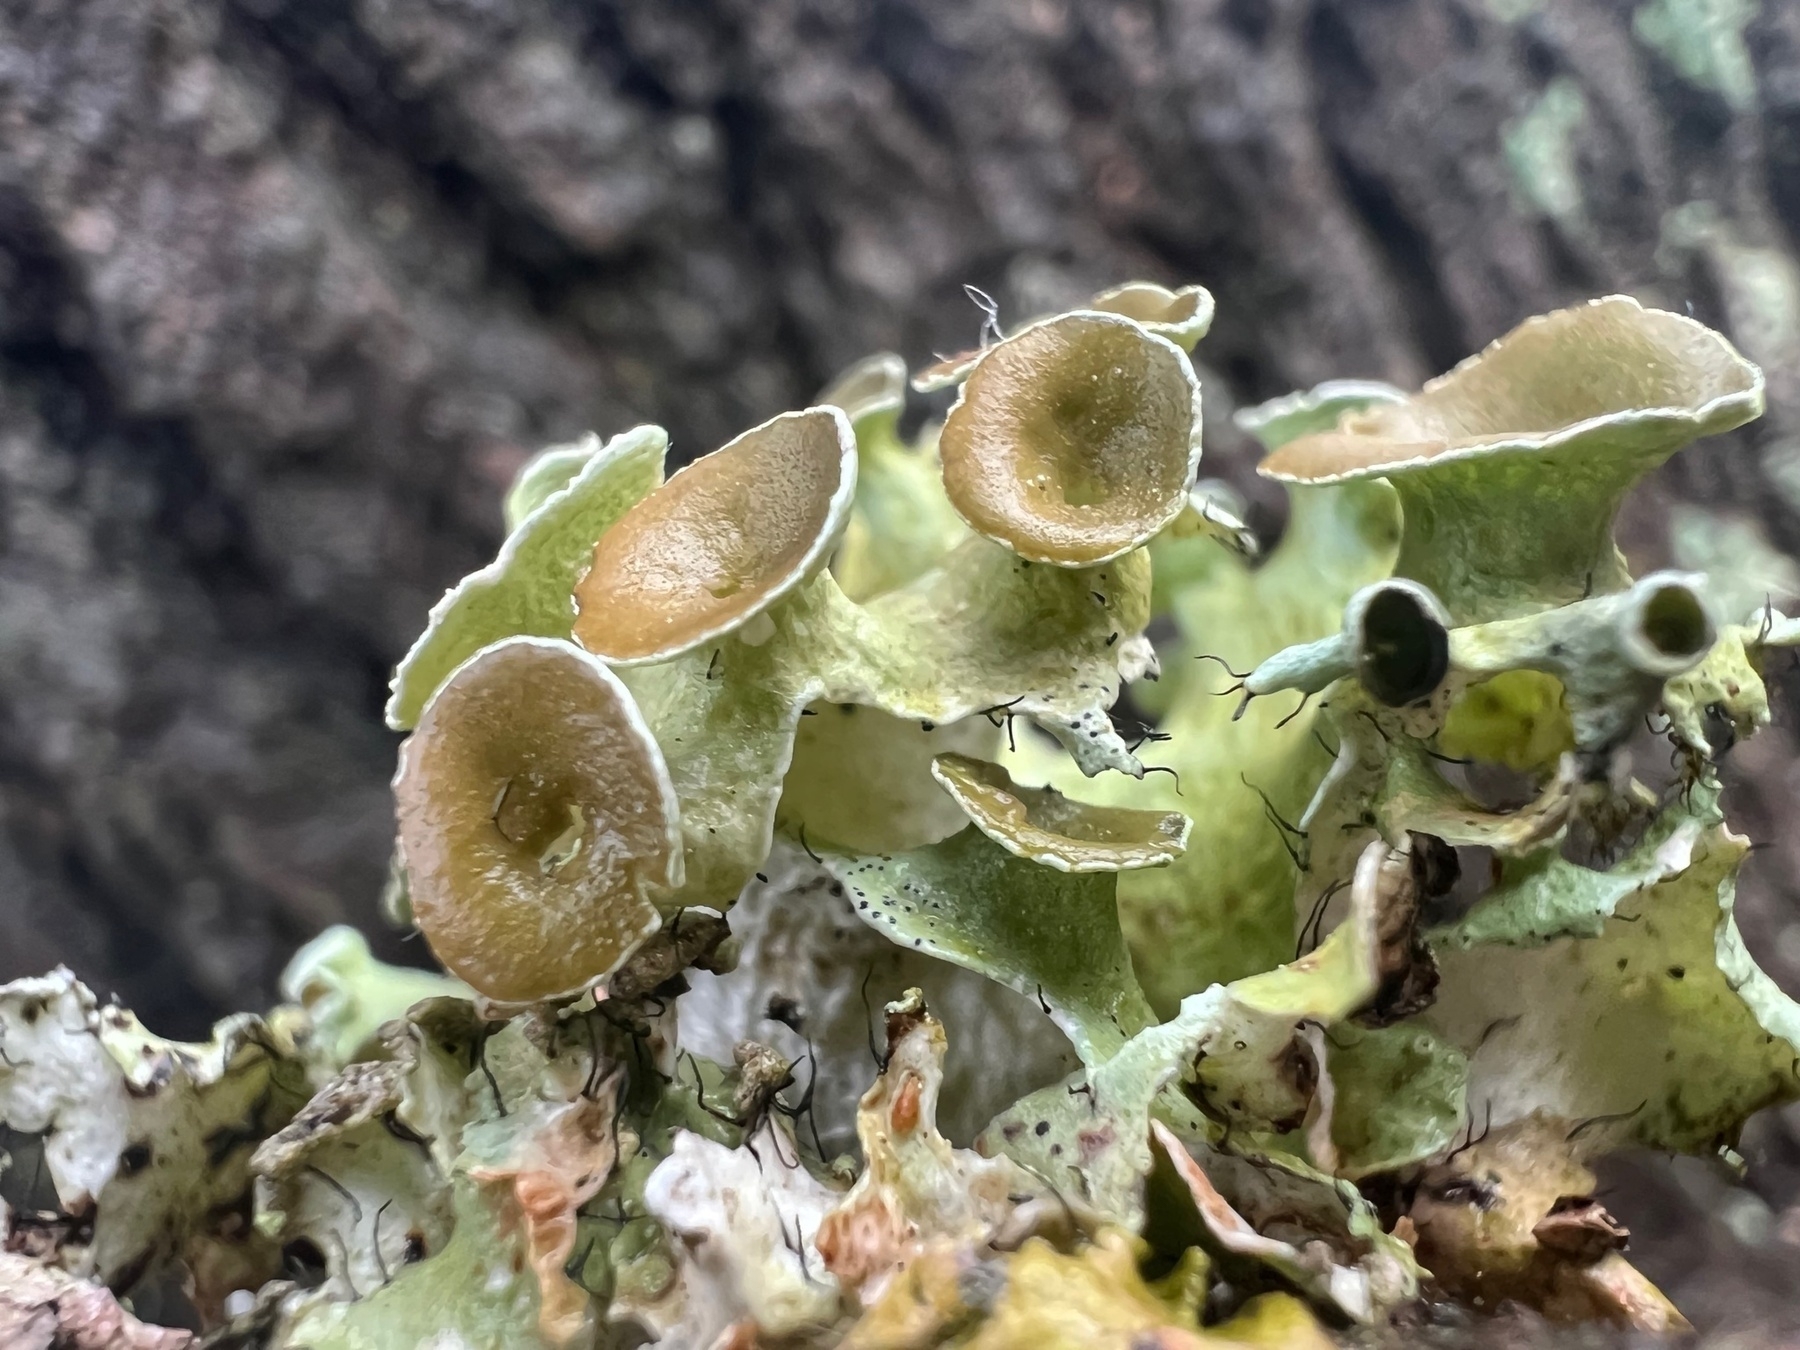 Brownish green, smooth, flat funnel shaped lichen, growing in a cluster on a branch.